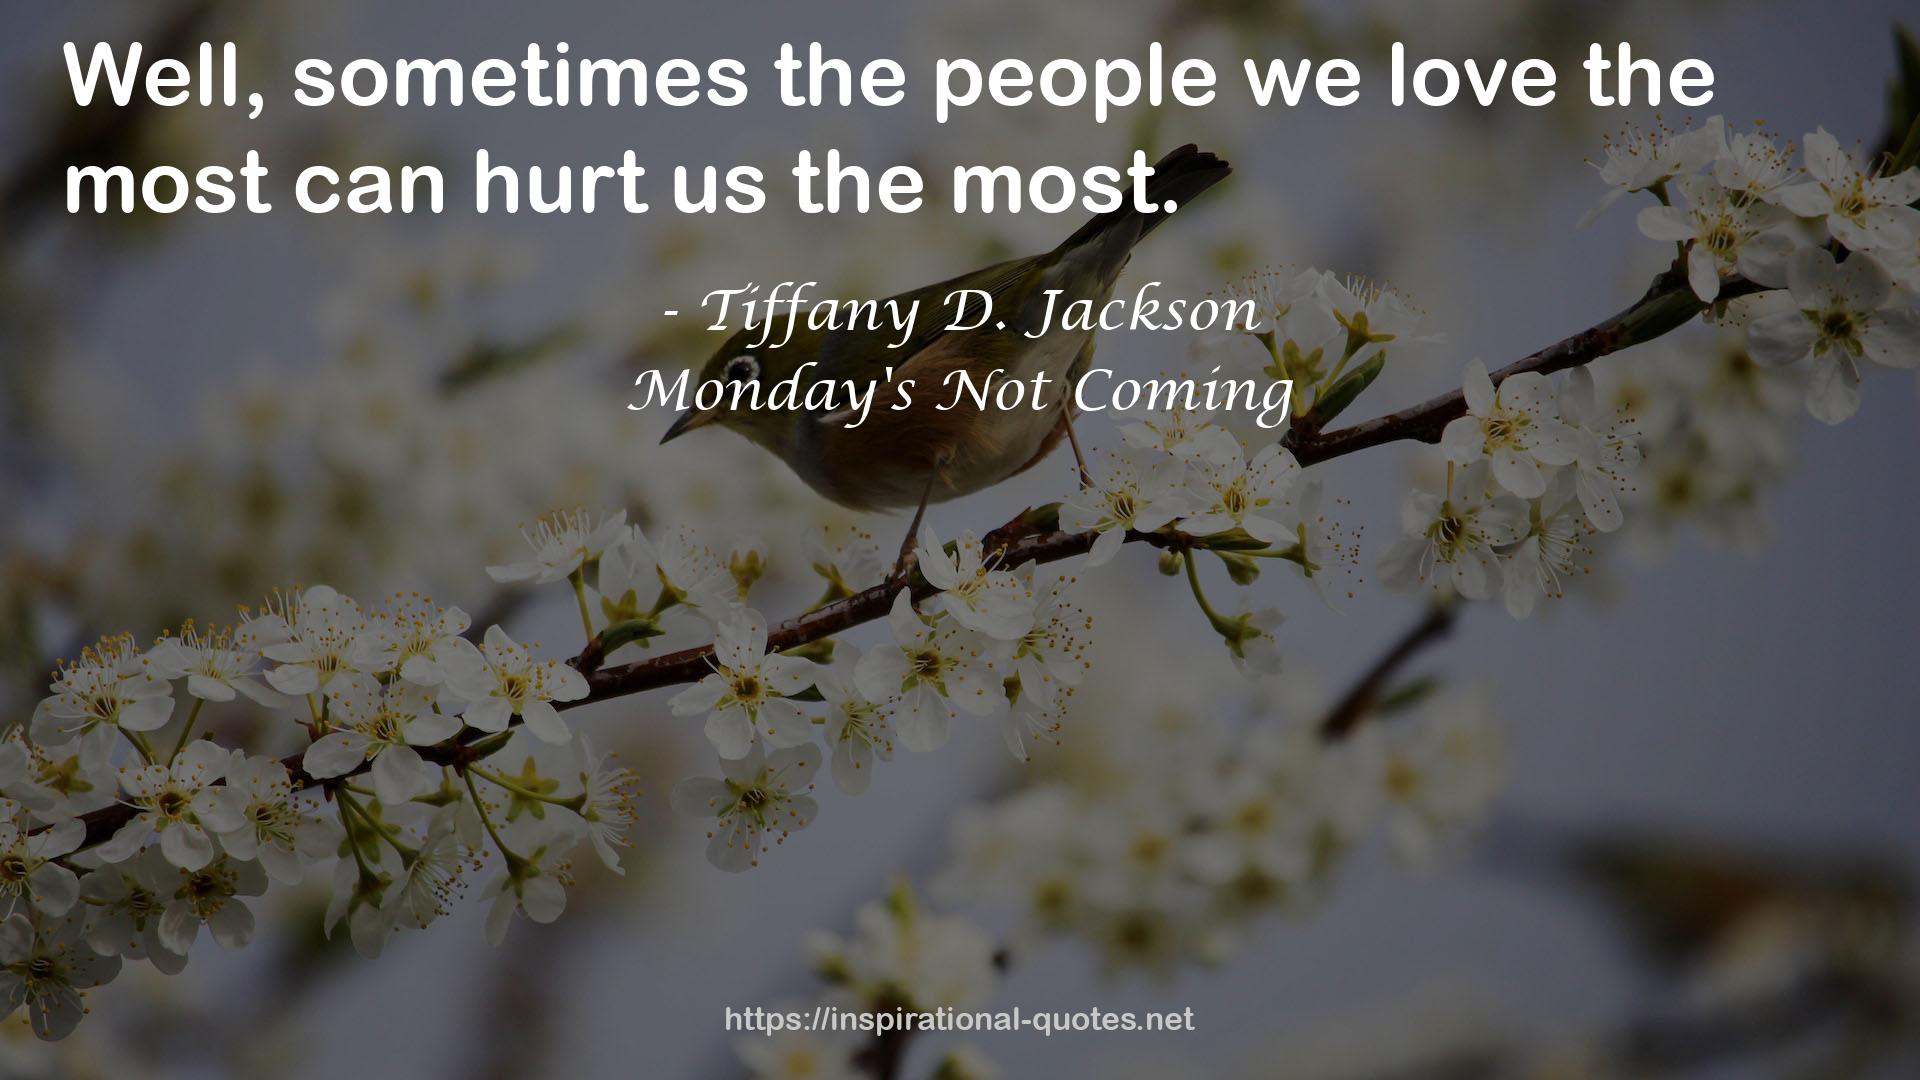 Monday's Not Coming QUOTES